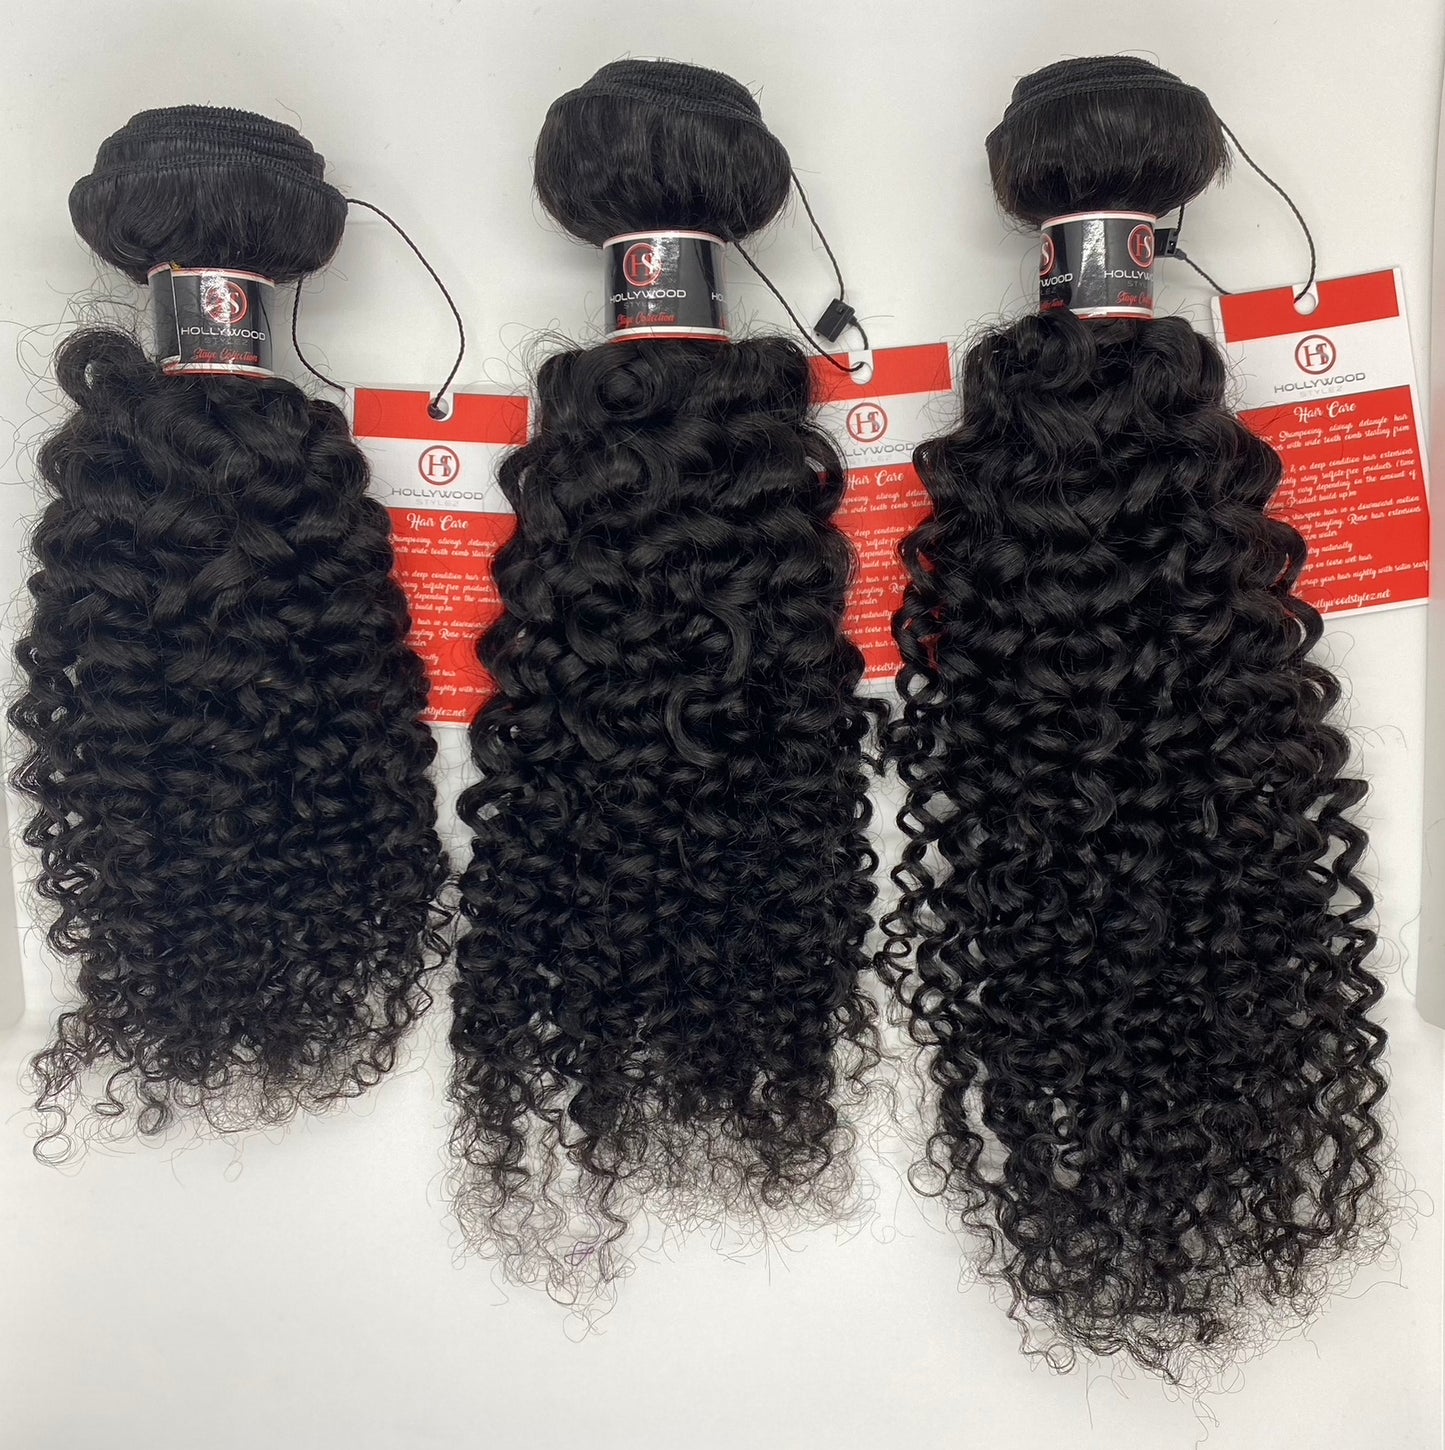 Stage Collection (Italian Curly)